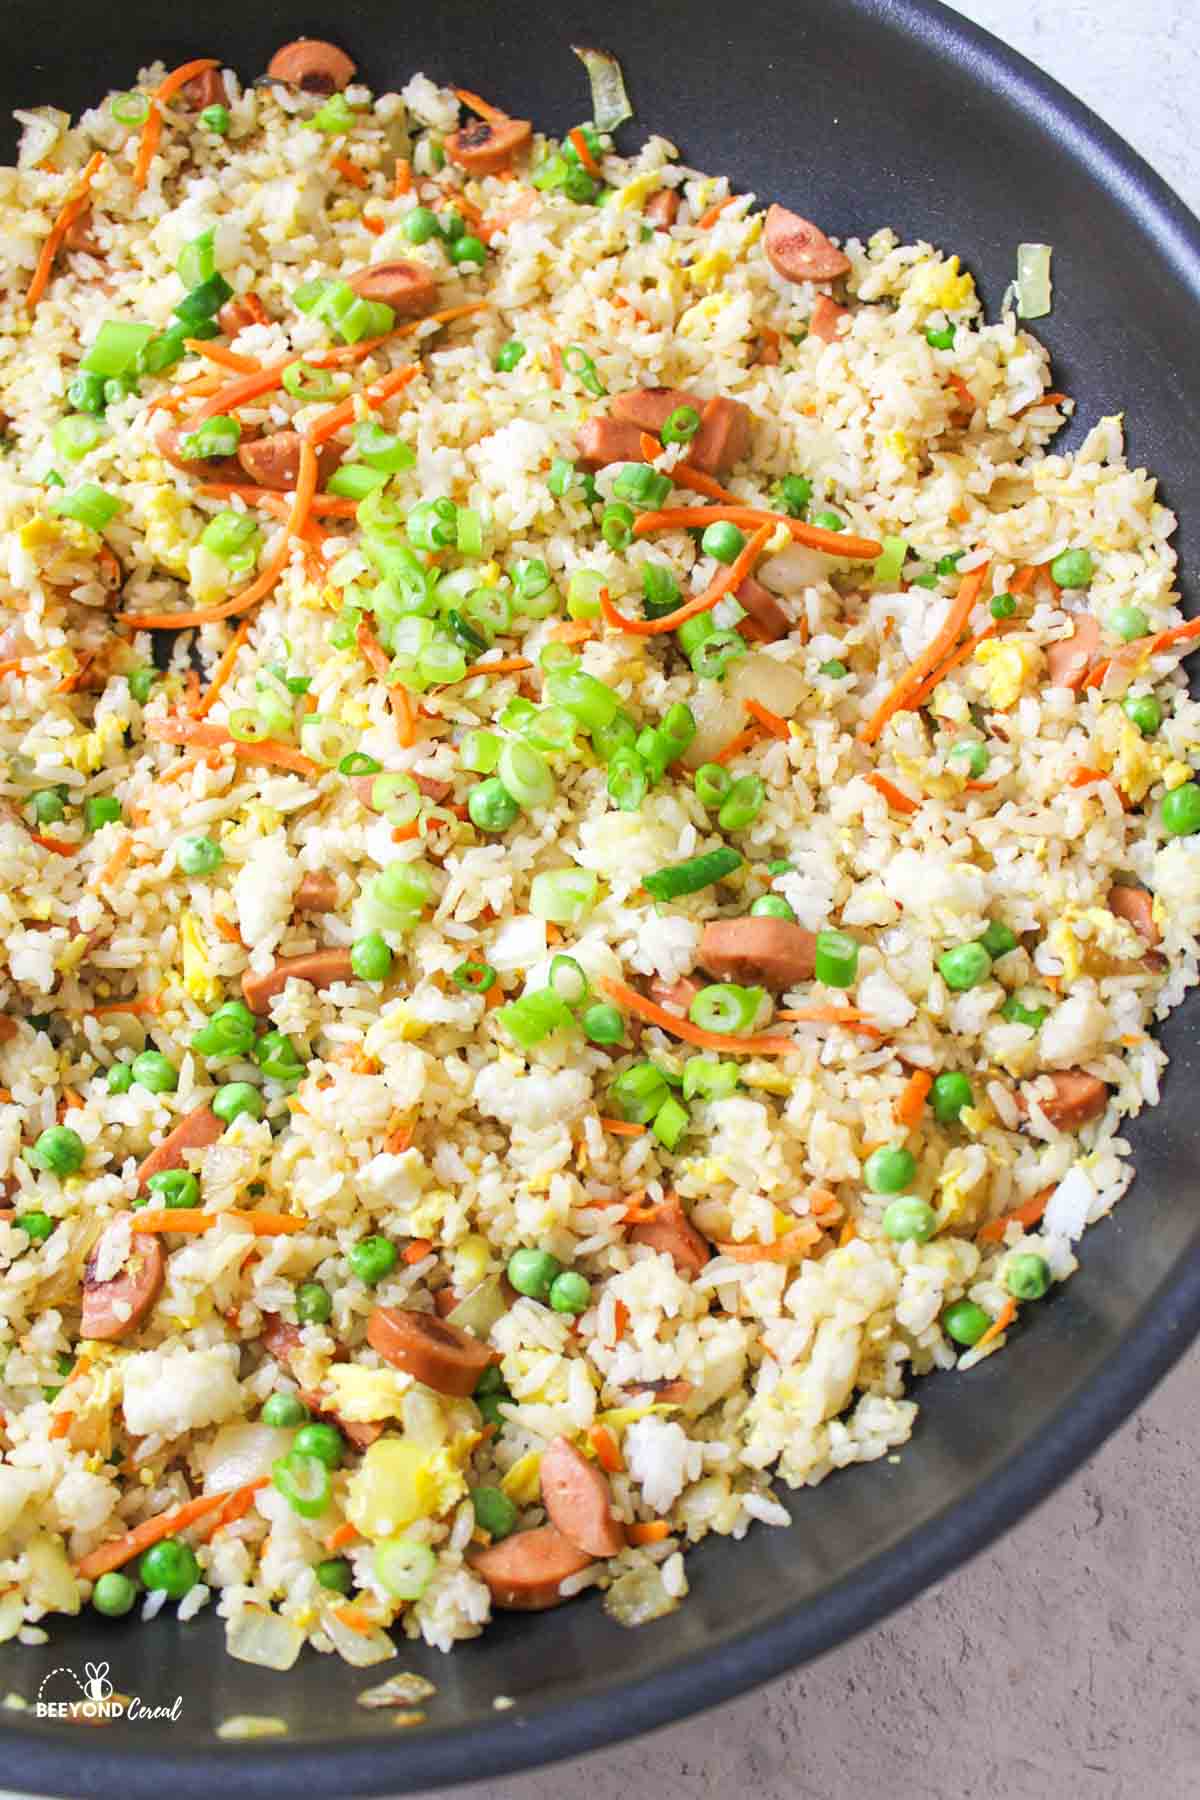 hot dog fried rice in a large black wok